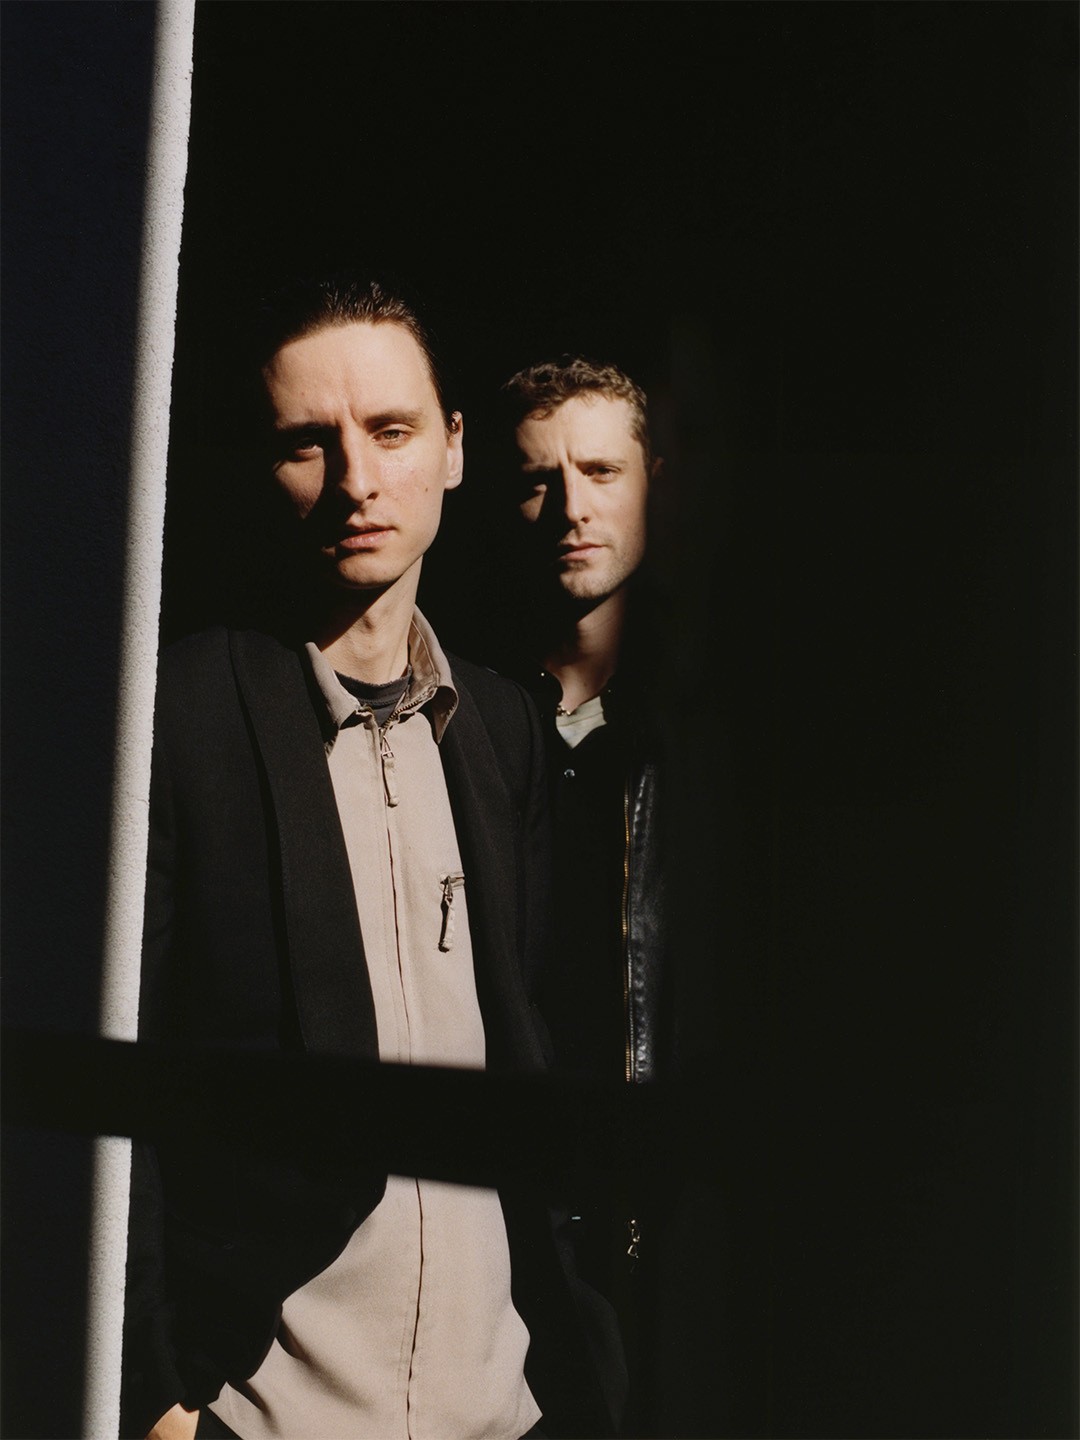 These New Puritans © Oscar Eckle